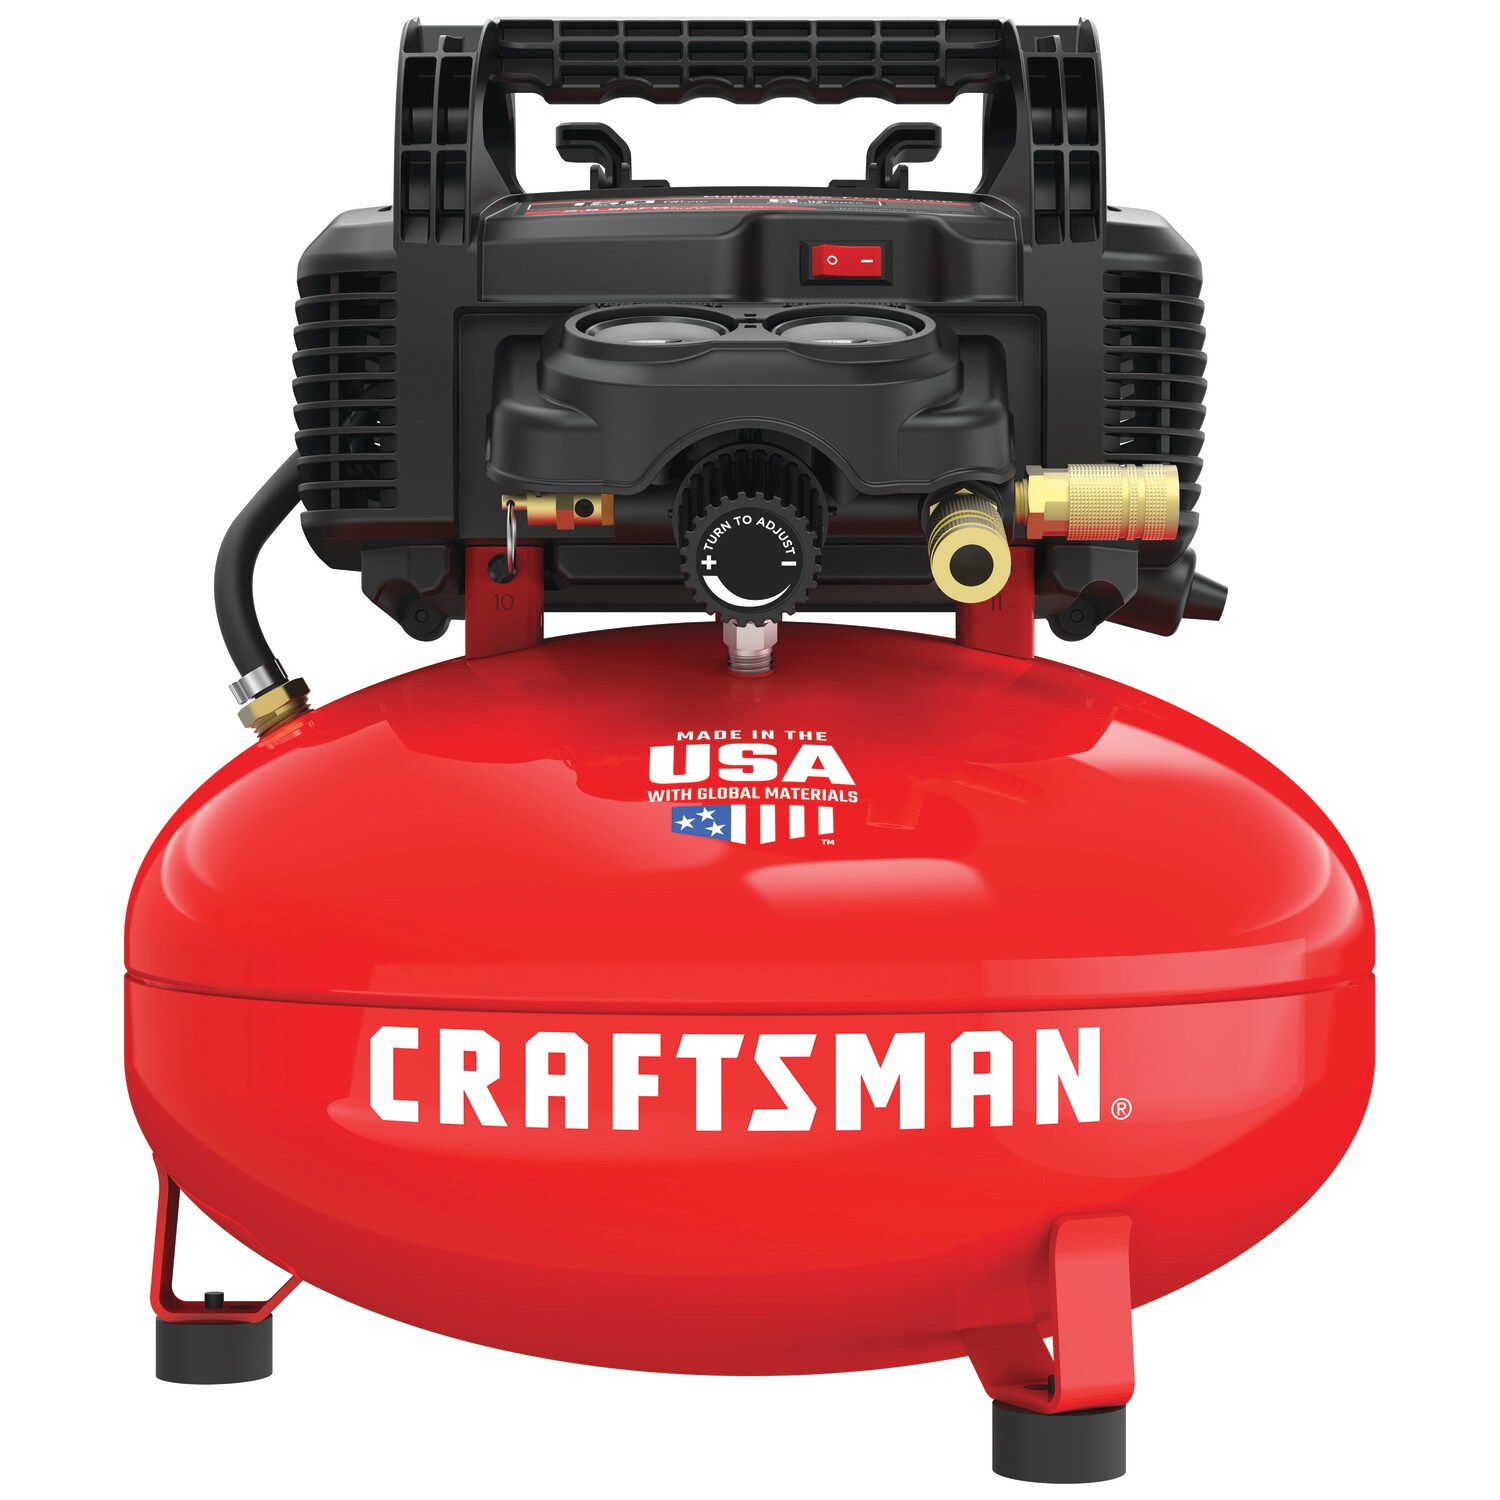 CRAFTSMAN 6-Gallons Single Stage Portable Corded Electric Pancake Air Compressor with Accessories